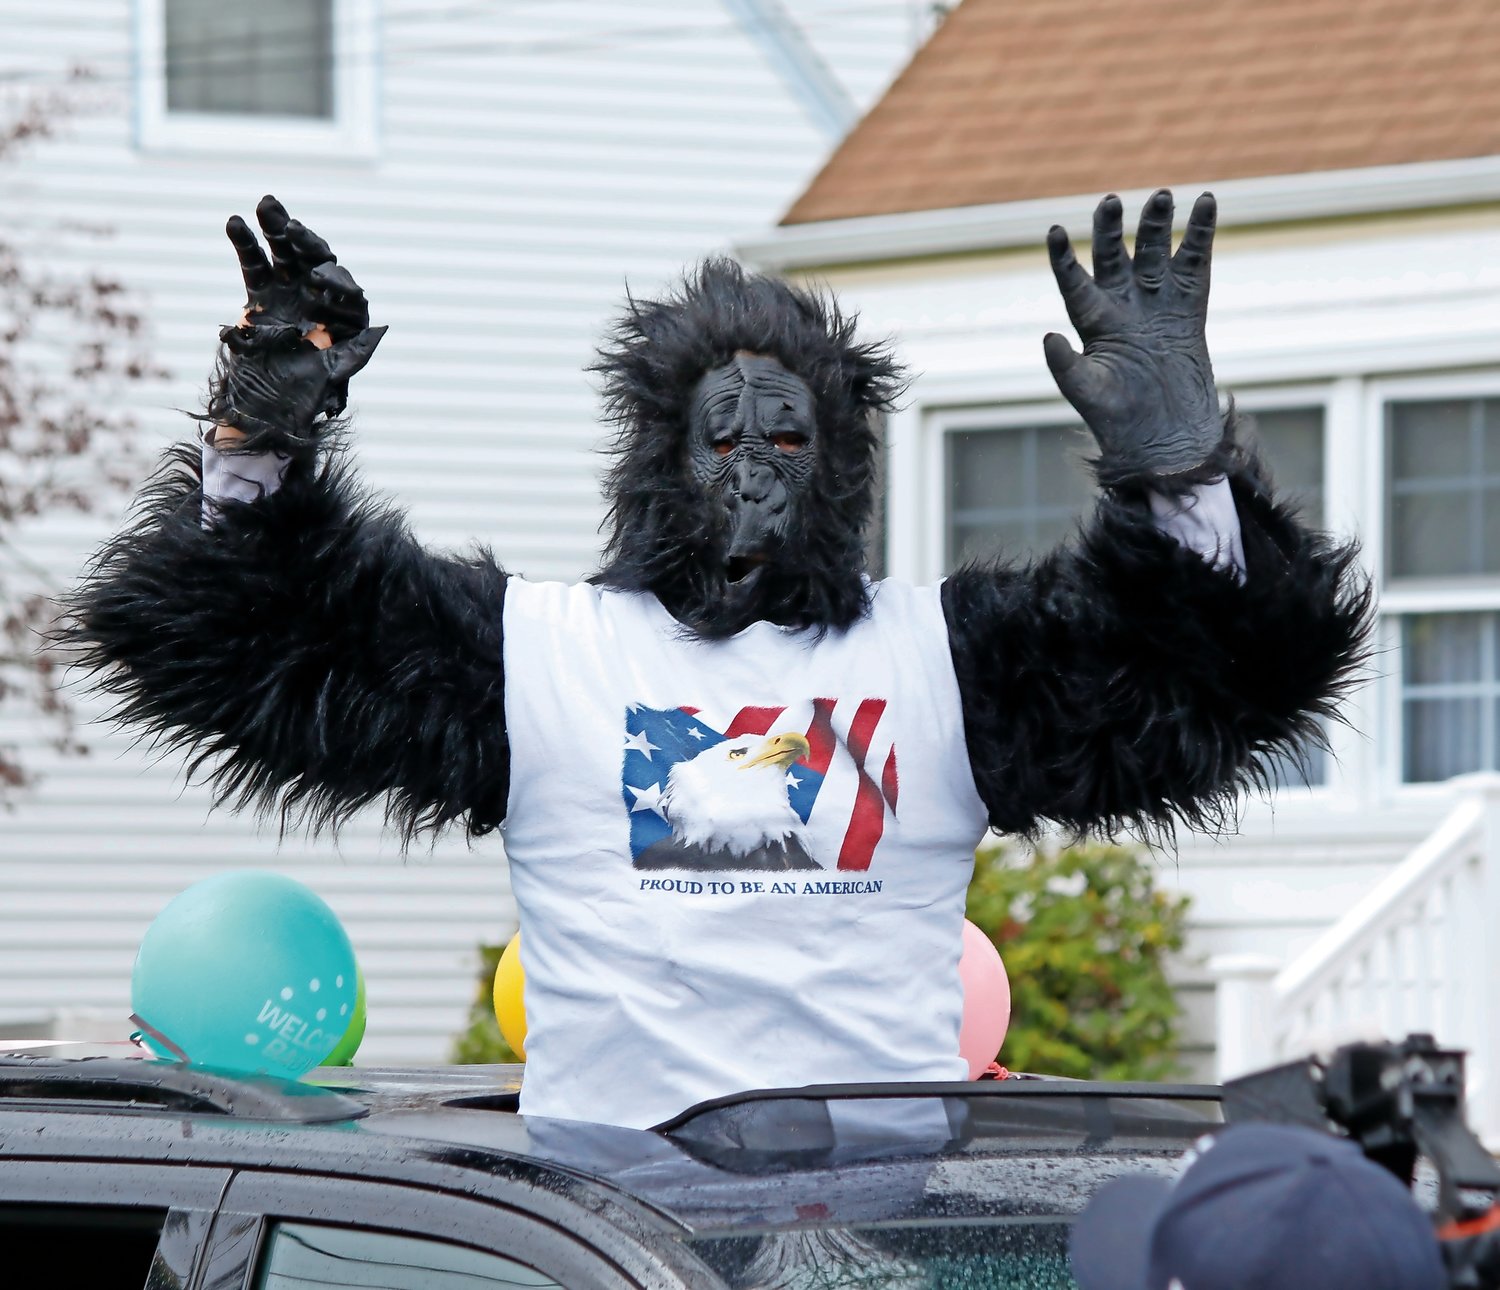 Even a gorilla joined in the parade and gift giving.